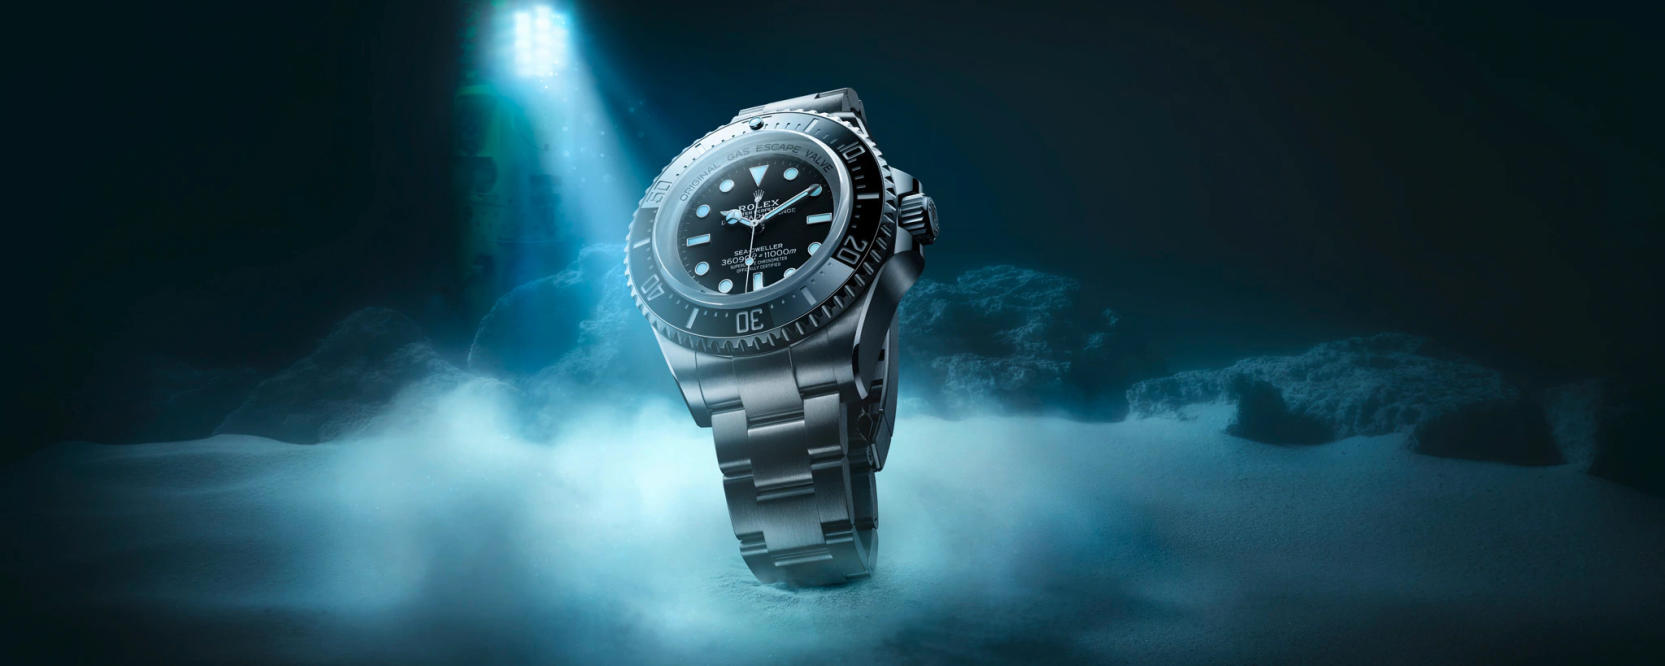 Rolex gains market share despite production loss of 140,000 watches last  year